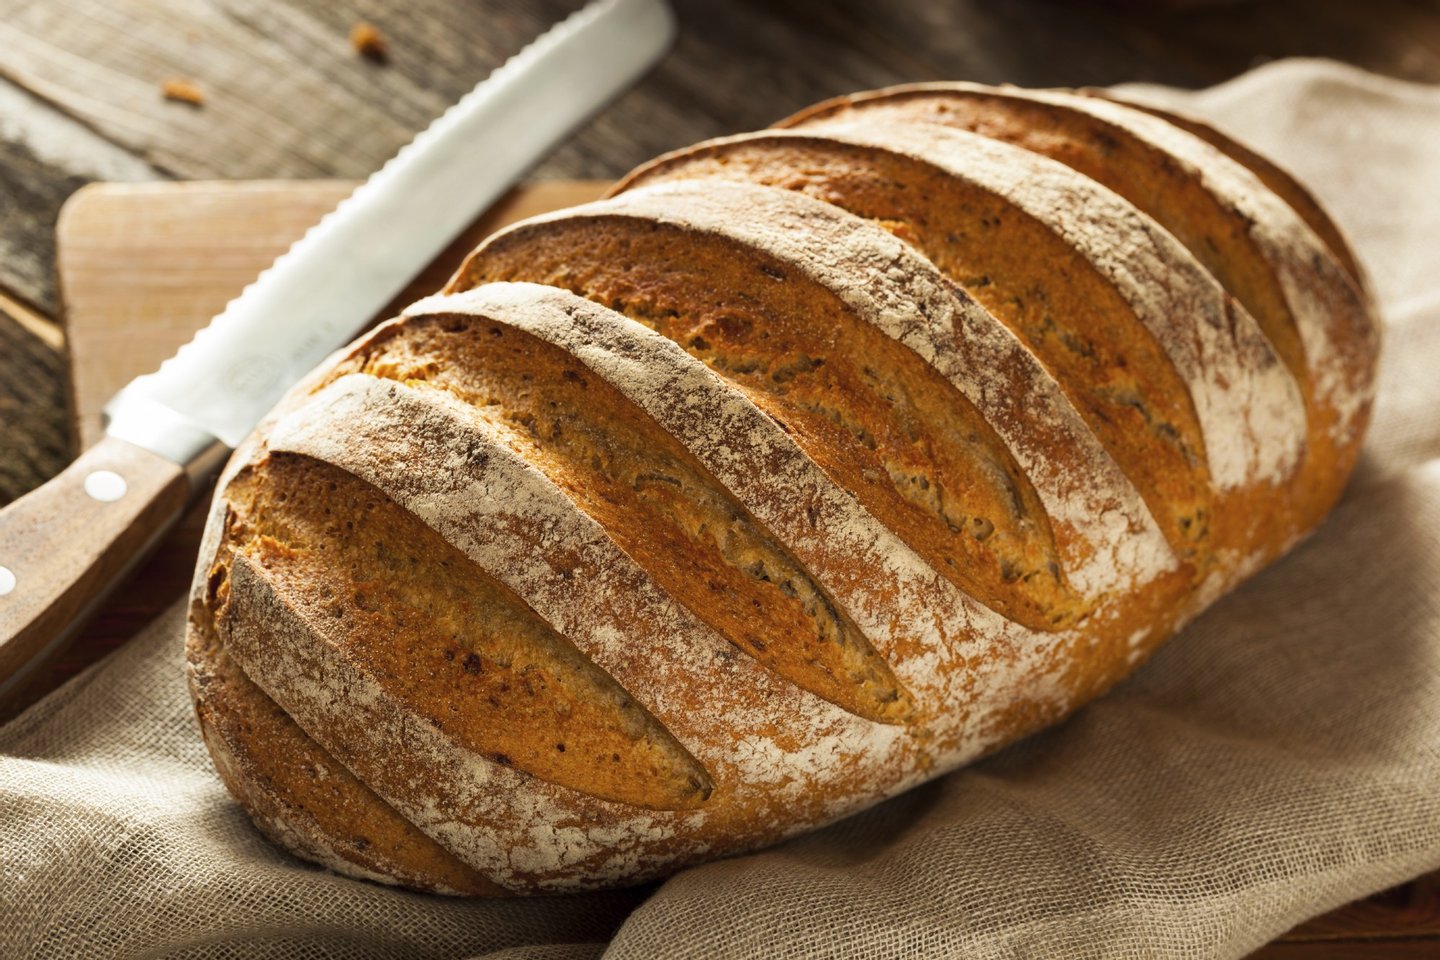 baguette, baked, bakery, baking, barley, bread, breakfast, brown, cereal, crumb, crust, crusty, cut, cutting, delicious, diet, food, french, fresh, freshness, gourmet, grain, health, healthy, heap, ingredient, loaf, meal, natural, nutrition, oat, organic, pastry, portion, round, rural, rustic, rye, rye bread, seed, slice, sliced, snack, tasty, texture, toast, traditional, wheat, whole, 